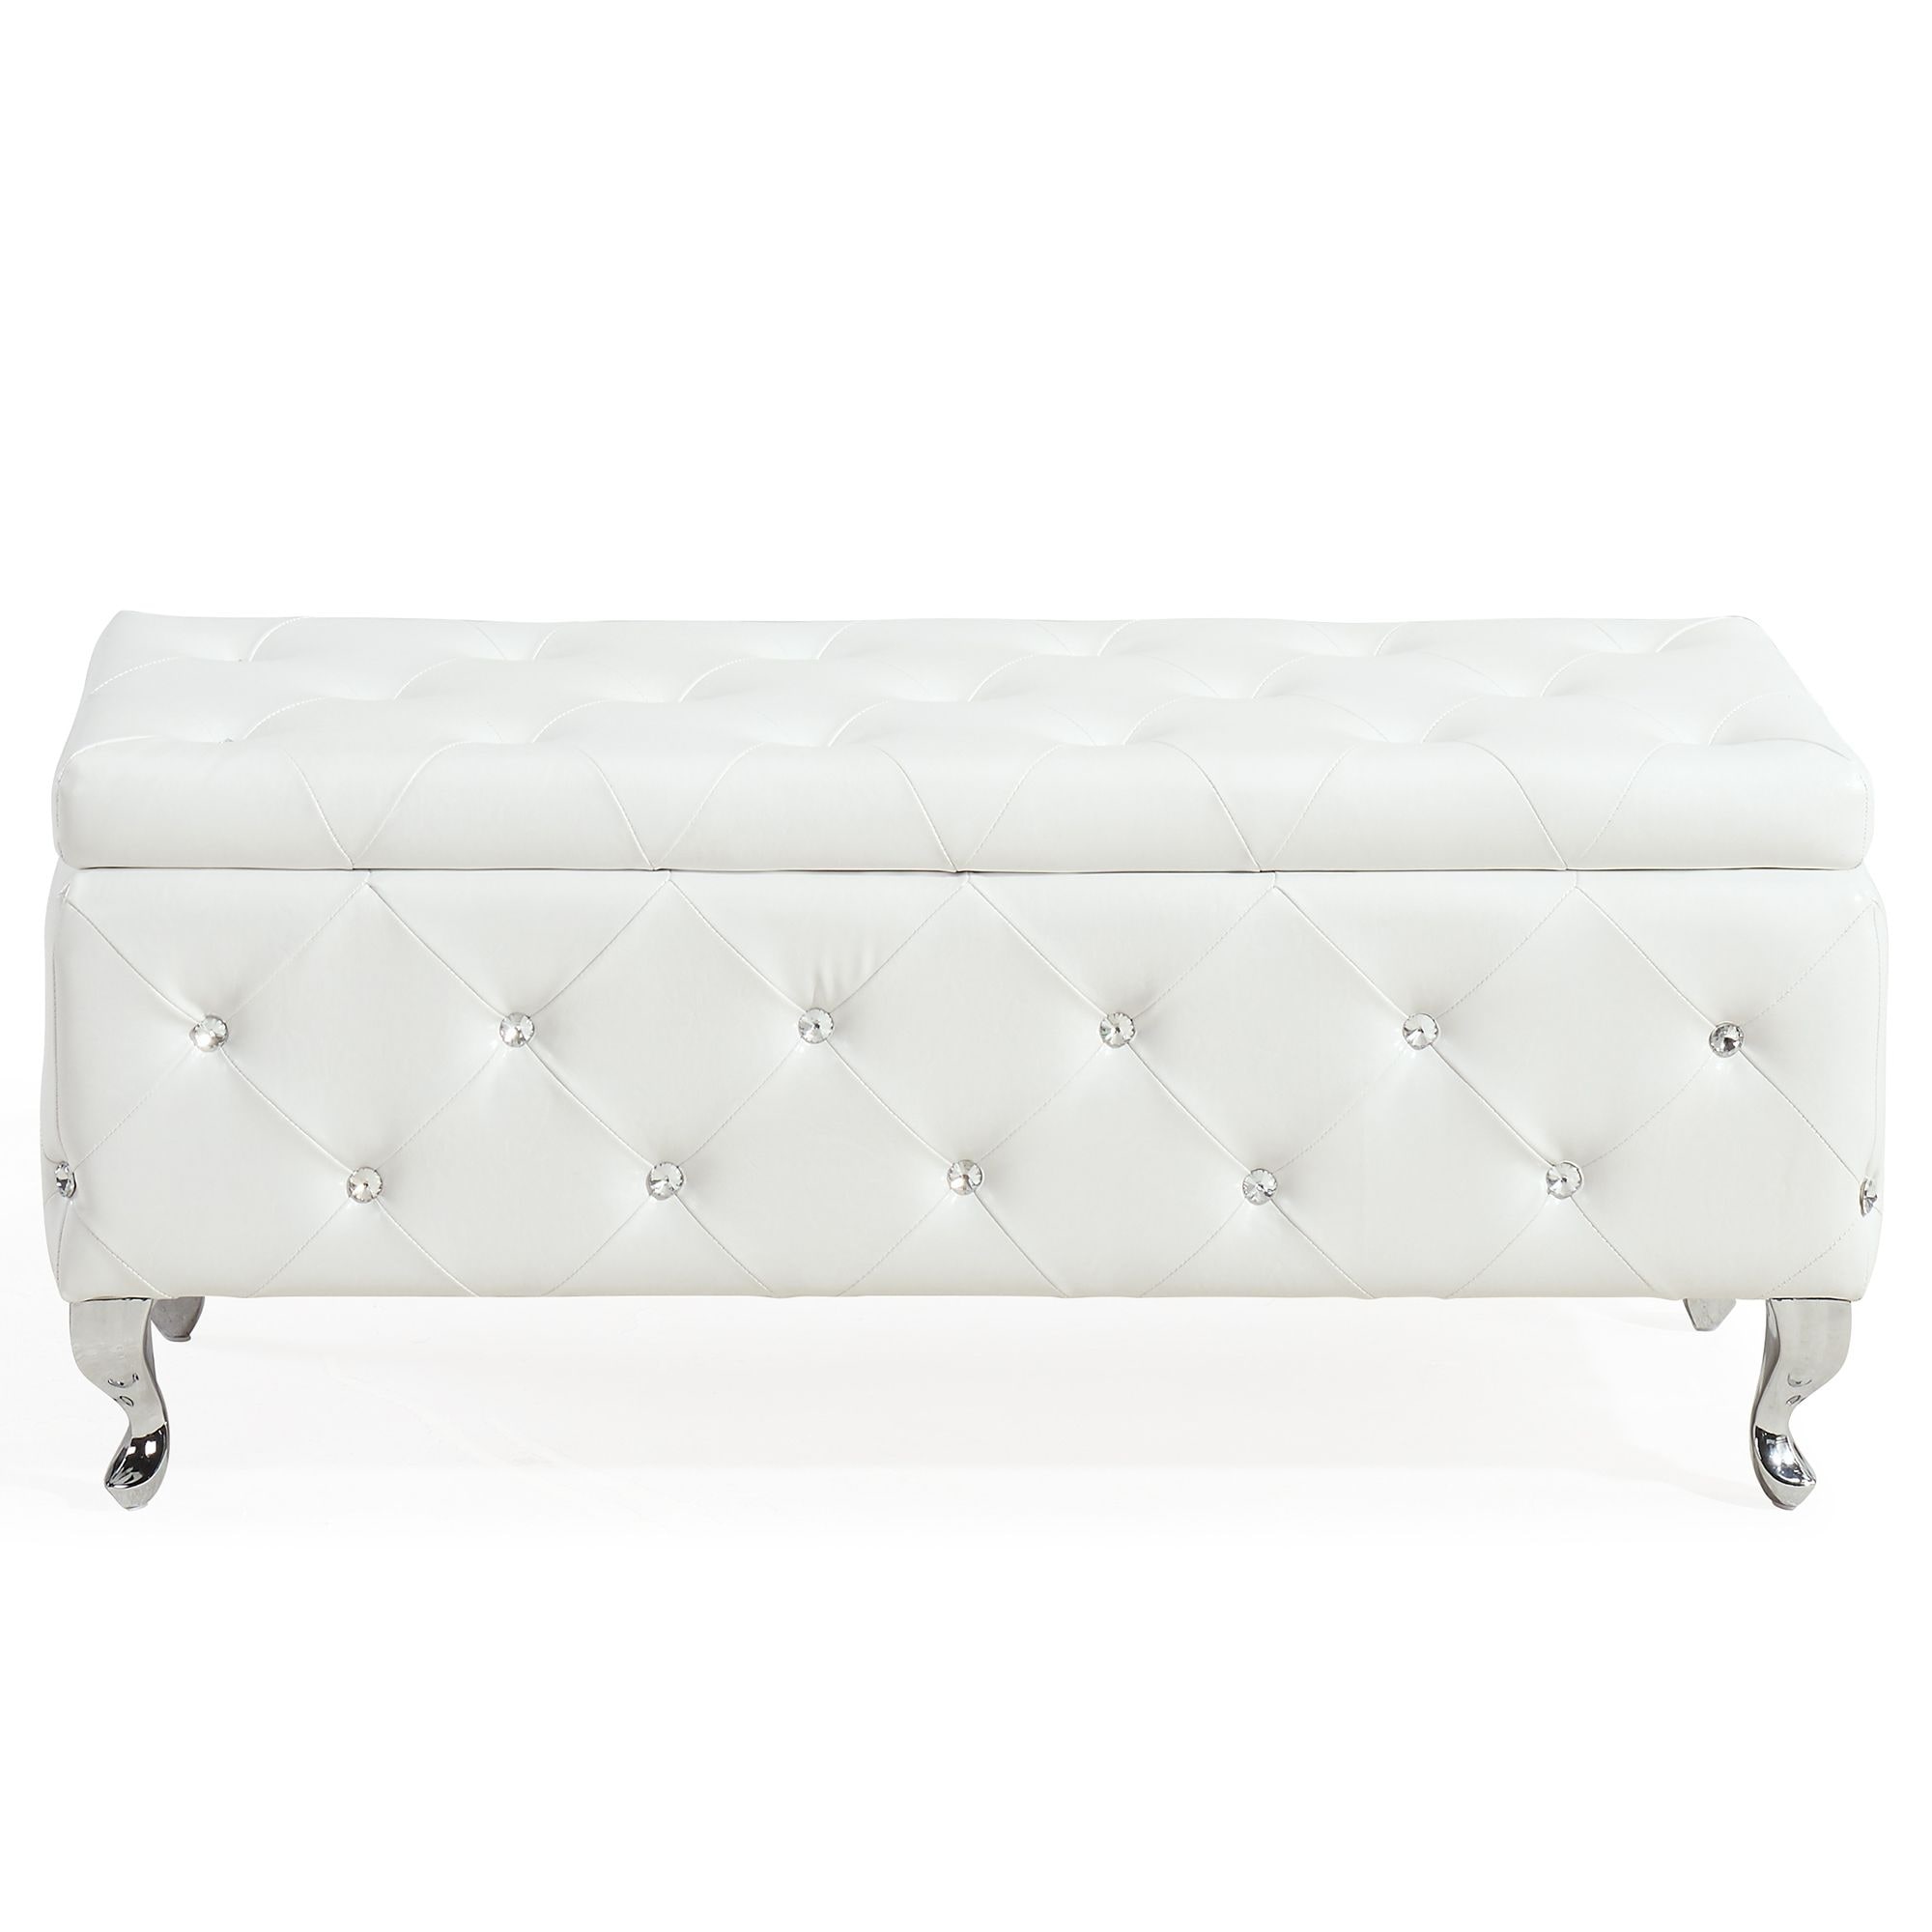 Contemporary Home Living 43.25 inch White and Silver Rectangular Storage Ottoman